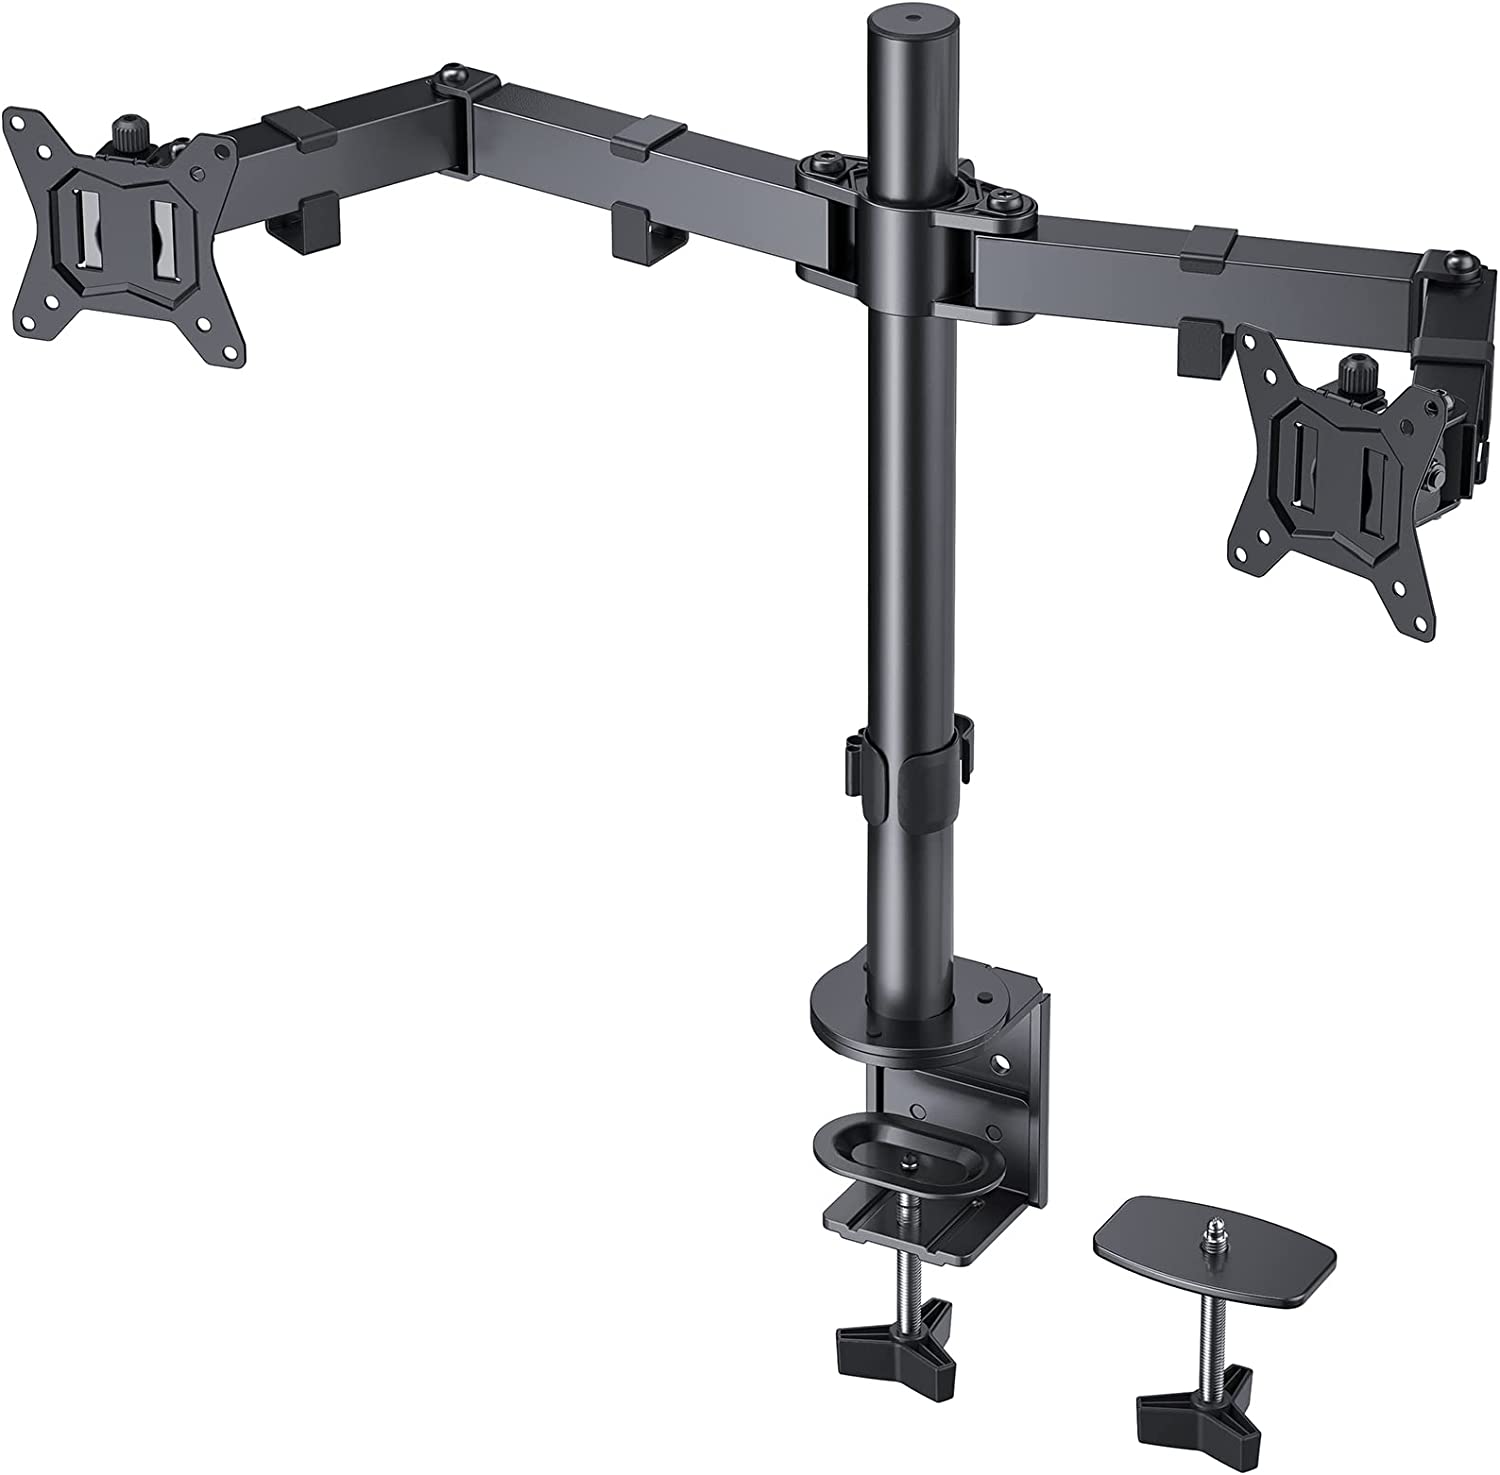 Irongear Dual Monitor Stand for 17-32 inch Screens,Heavy Duty Fully Adjustable Monitor Arm with C-Clamp Hardware,Dual Monitor Mount Supports up to 17.6 lbs